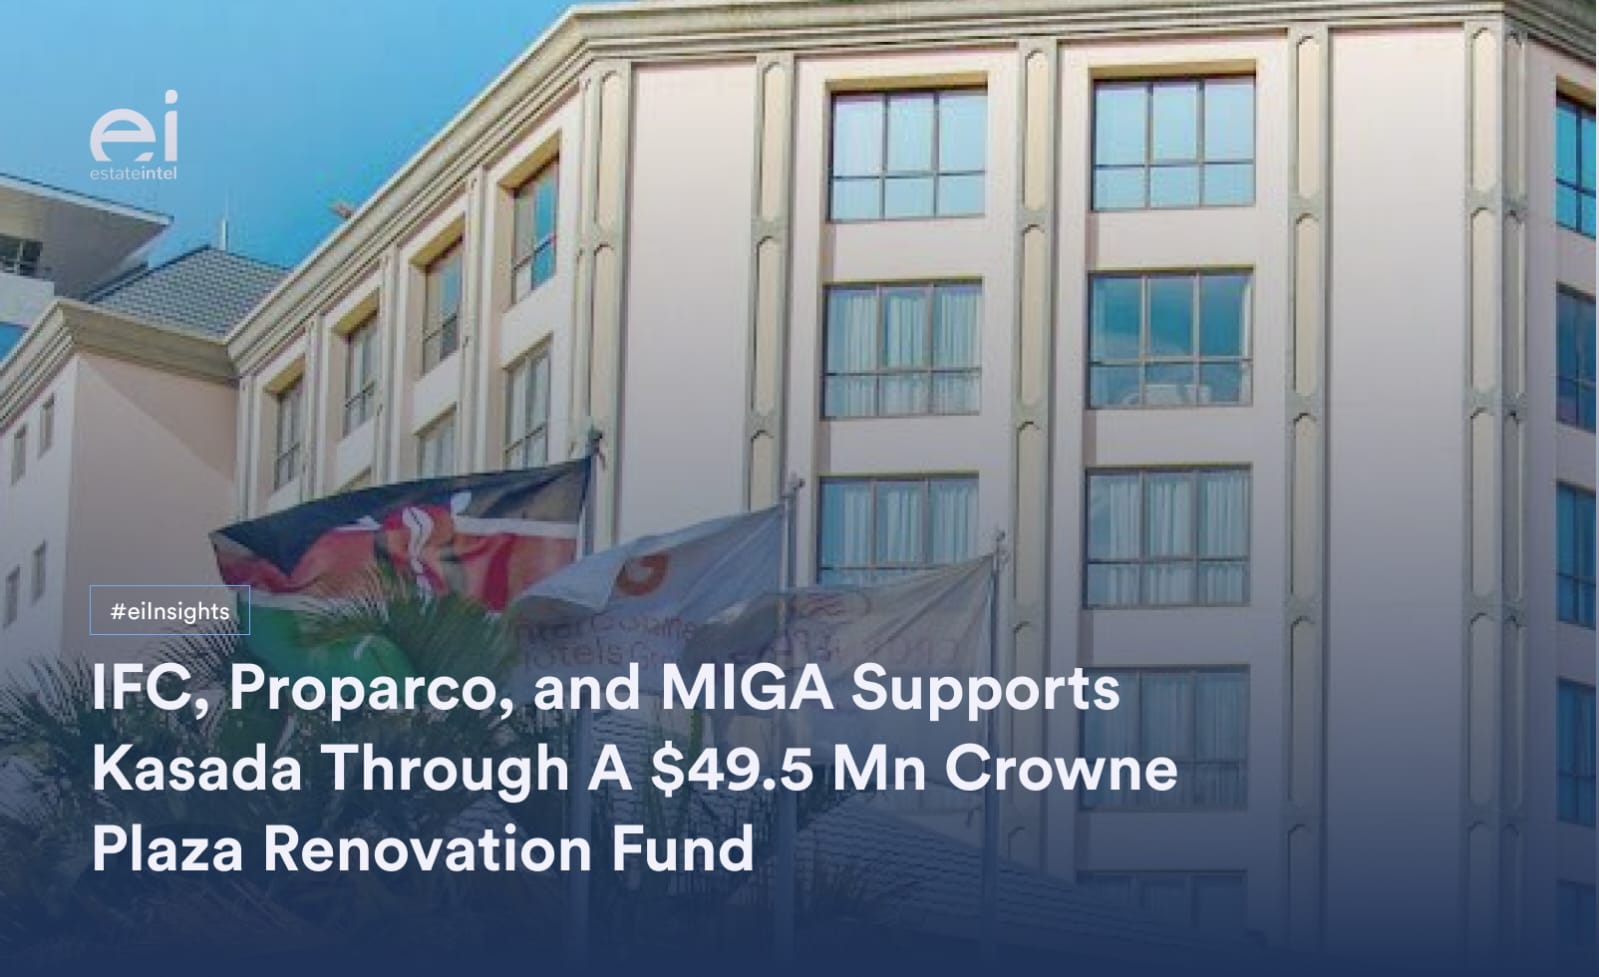 IFC, Proparco, and MIGA Supports Kasada Through A $49.5 Mn Crowne Plaza Renovation Fund